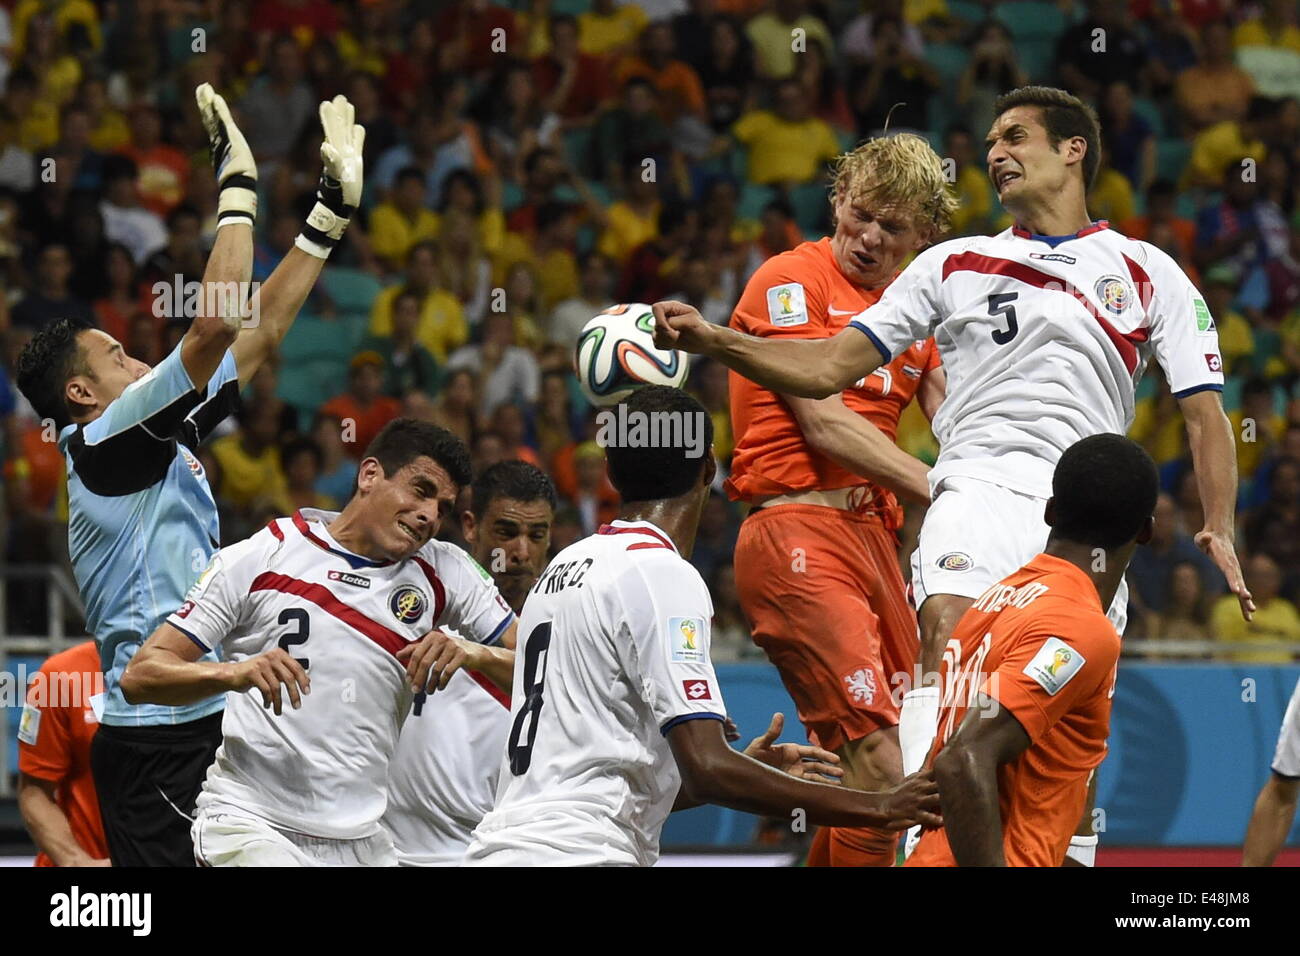 Salvador, Brazil. 5th July, 2014. Netherlands's Dirk Kuyt (3rd R) vies with Costa Rica's Johnny Acosta (No.2), Heiner Mora (No.8) and Celso Borges (No.5) during the extra time of a quarter-finals match between Netherlands and Costa Rica of 2014 FIFA World Cup at the Arena Fonte Nova Stadium in Salvador, Brazil, on July 5, 2014. Netherlands won 4-3 on penalties over Costa Rica after a 0-0 tie and qualified for semi-finals on Saturday. Credit:  Lui Siu Wai/Xinhua/Alamy Live News Stock Photo